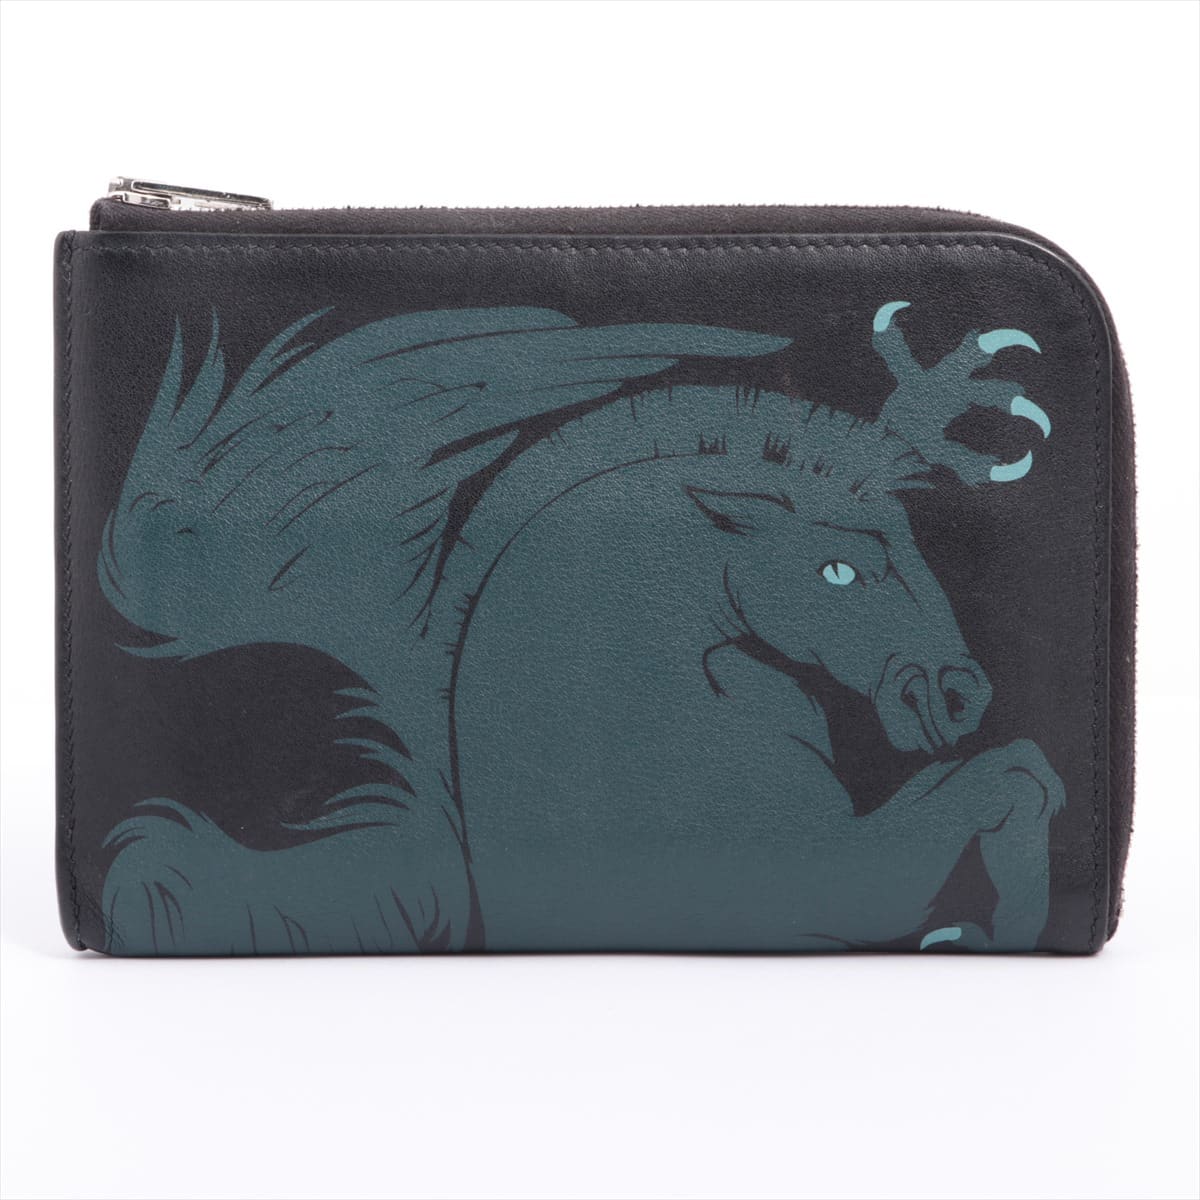 Hermès Remix Duo Veau Swift Compact Wallet Black Silver Metal fittings The engraving is not clear Chimera Pegasus